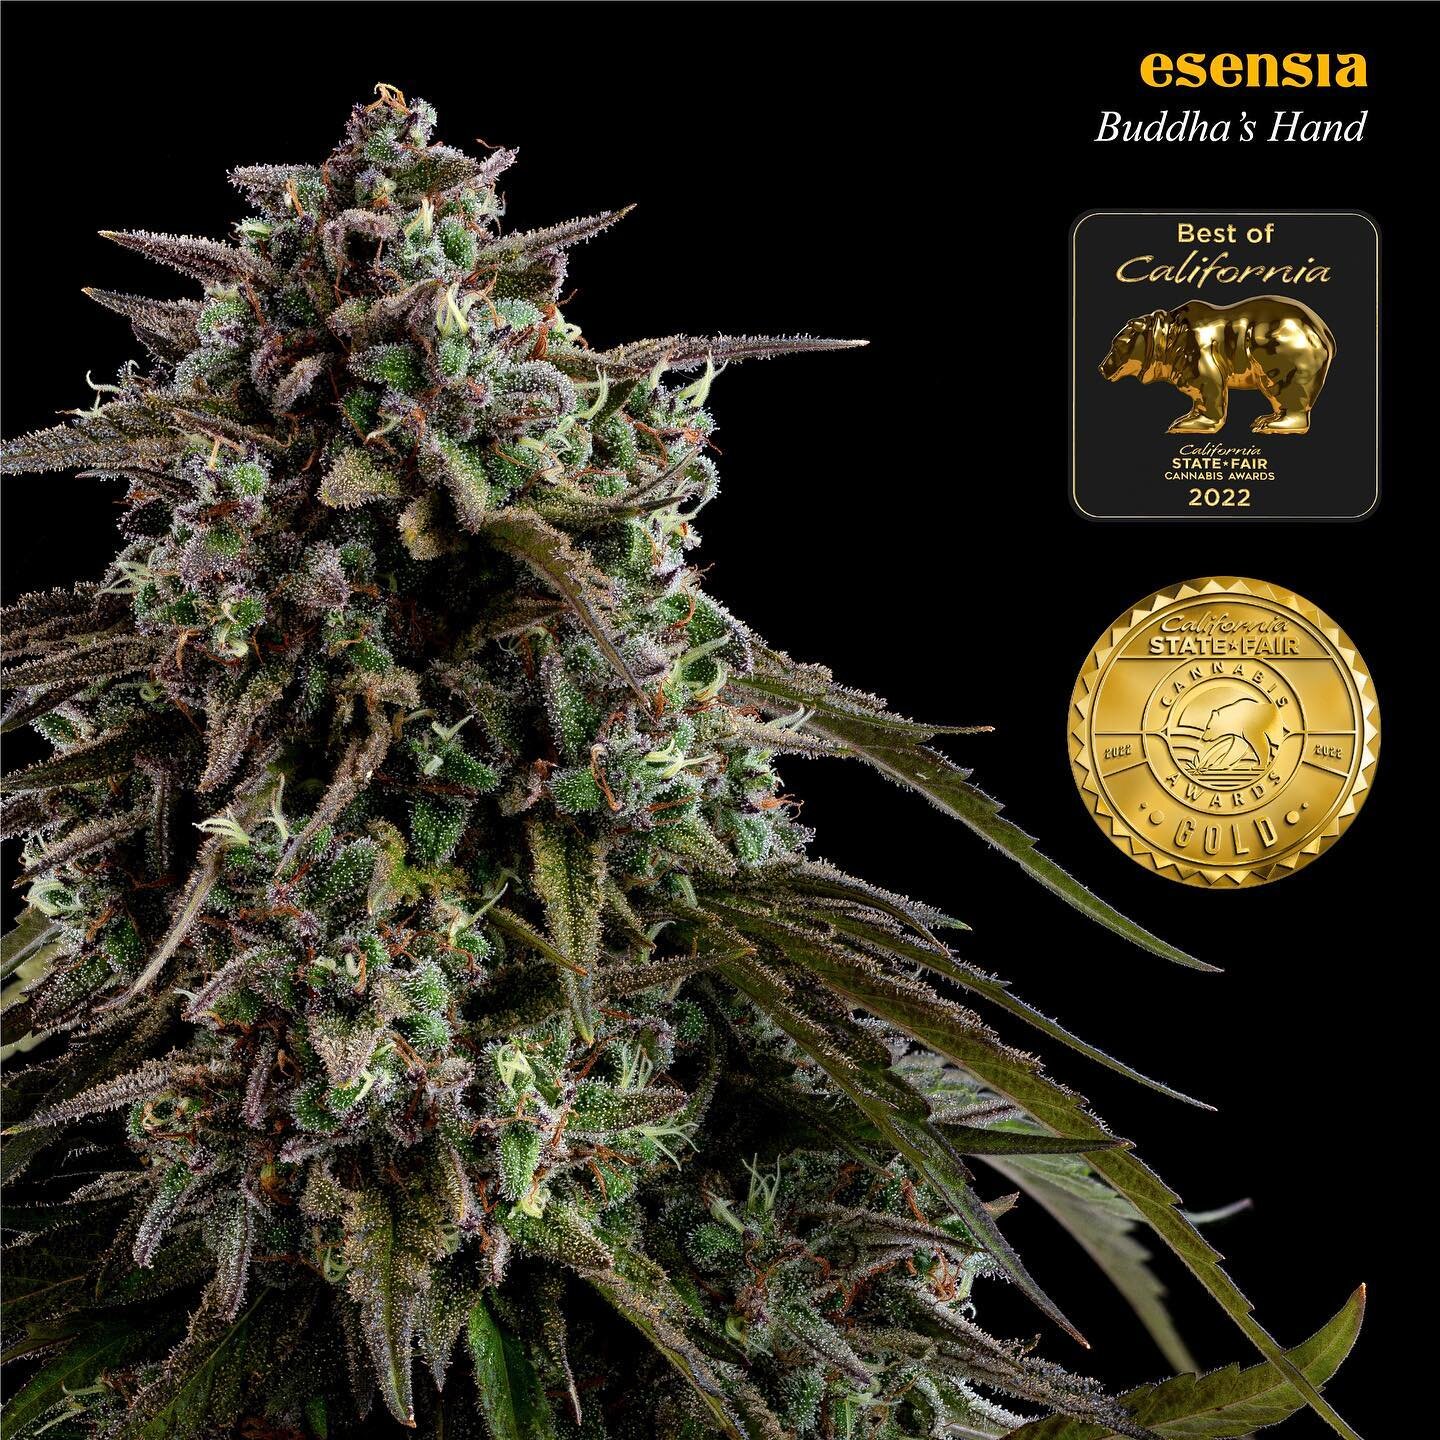 Celebrating more wins! We are excited to announce we have won 5 awards at the first ever cannabis competition at the California State Fair @castatefair / @calcannaawards!

🧸&ldquo;Golden Bear&rdquo; Award - Best of California for Buddha&rsquo;s Hand